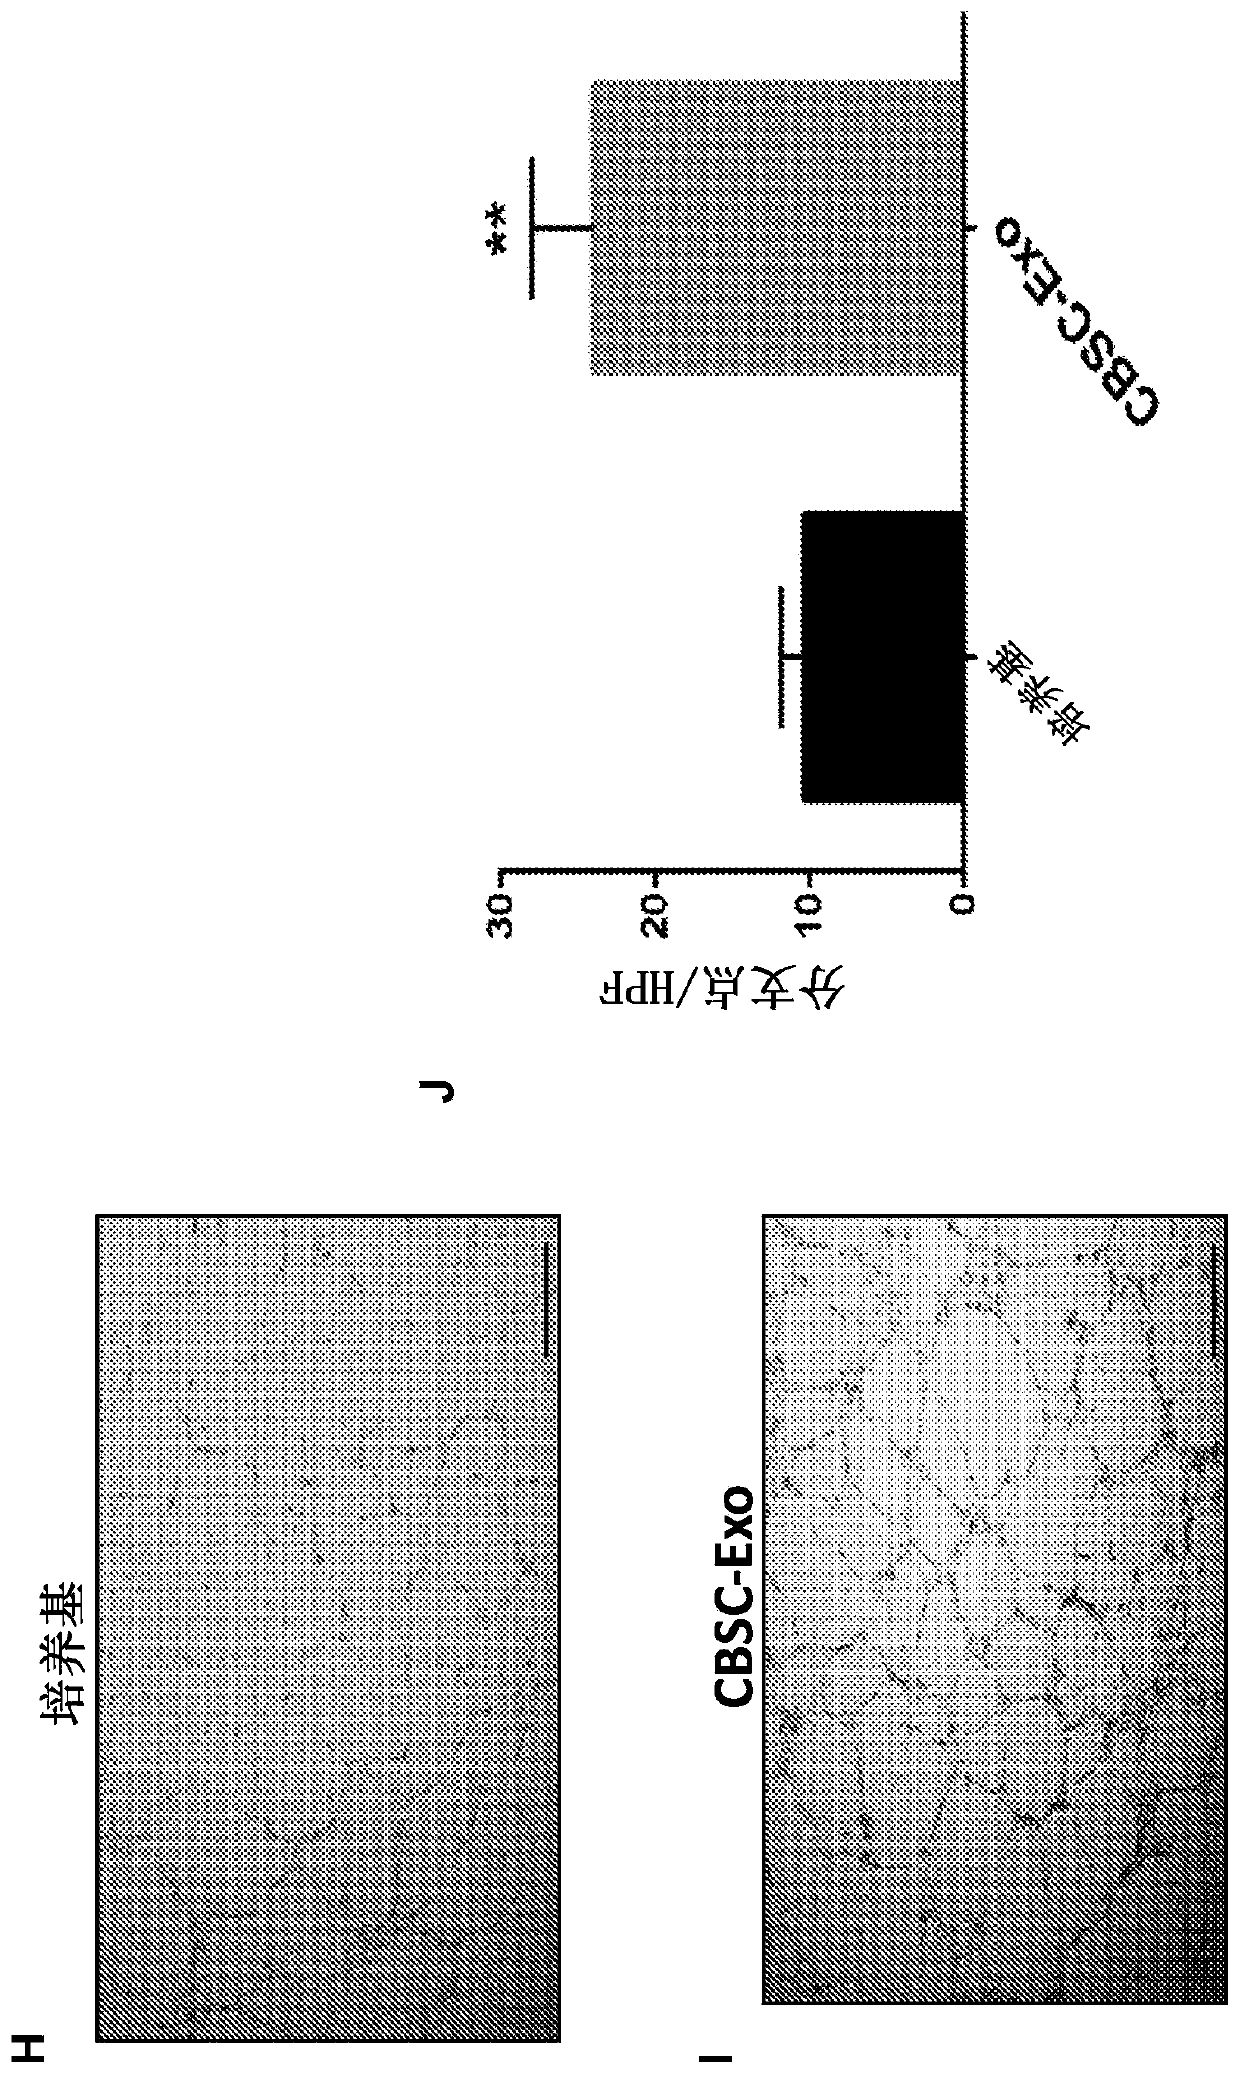 Augmenting heart function after cardiac injury with exosomes derived from cortical bone stem cells